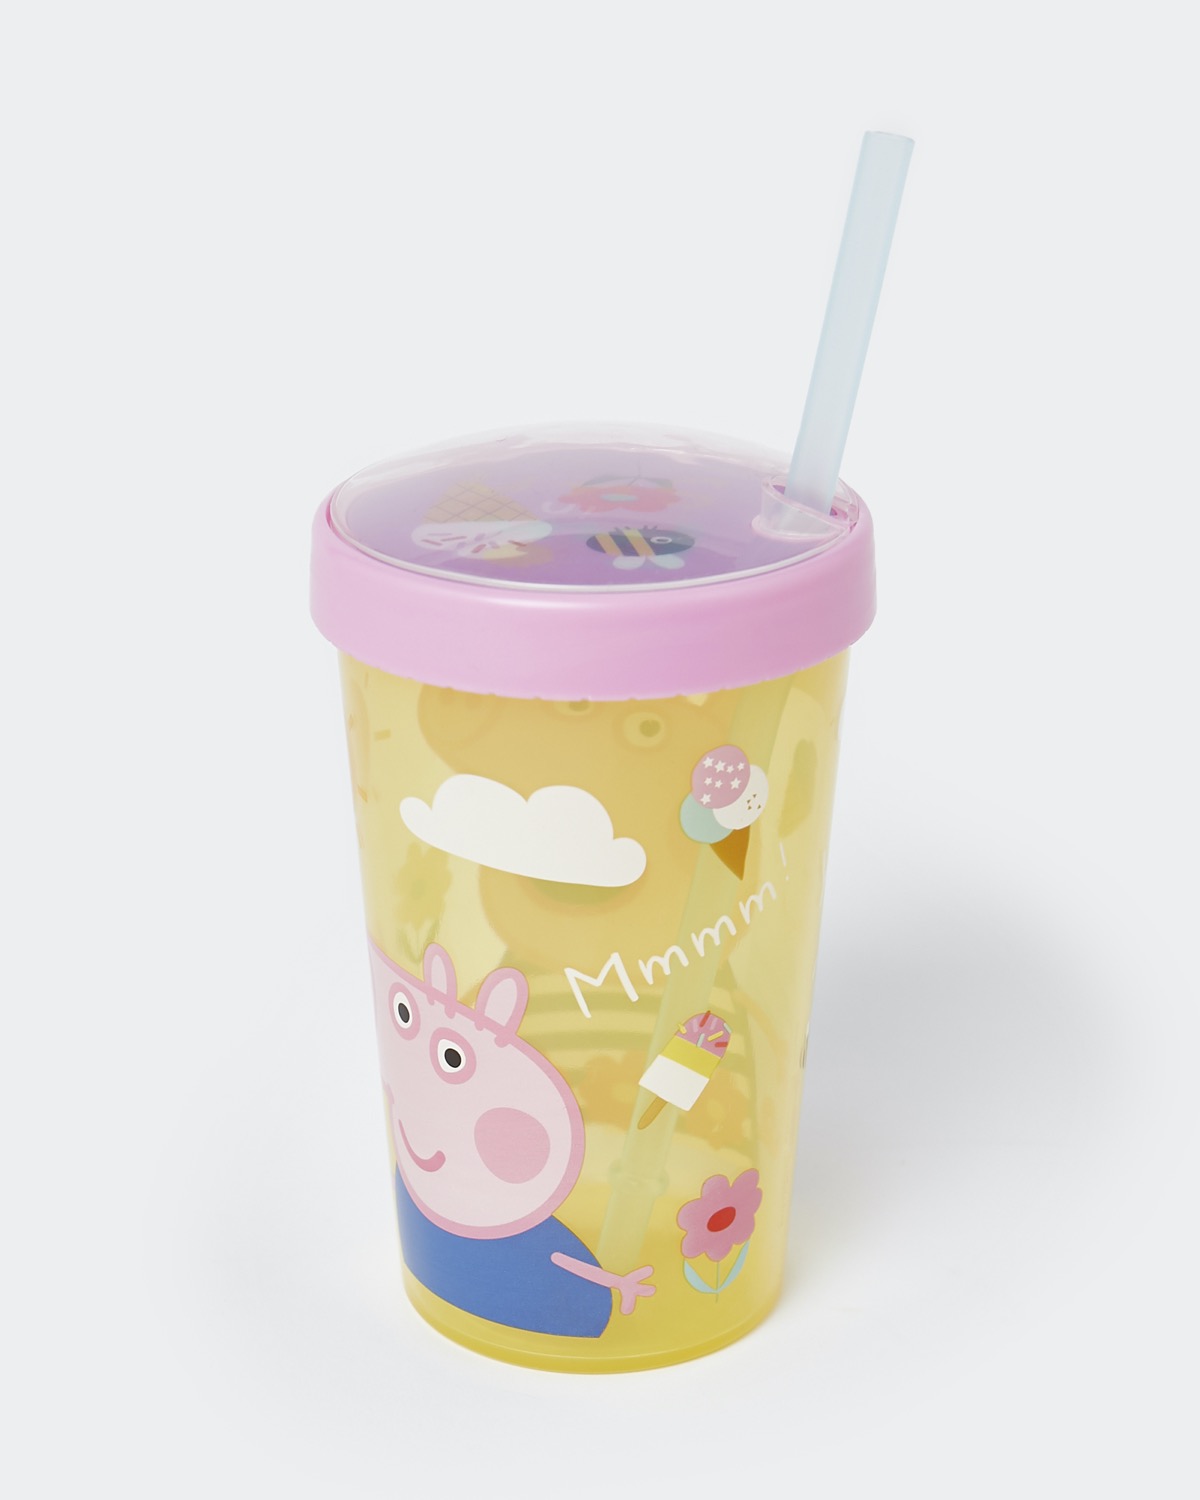 https://dunnes.btxmedia.com/pws/client/images/catalogue/products/6270518/zoom/6270518_peppa-pig_3.jpg